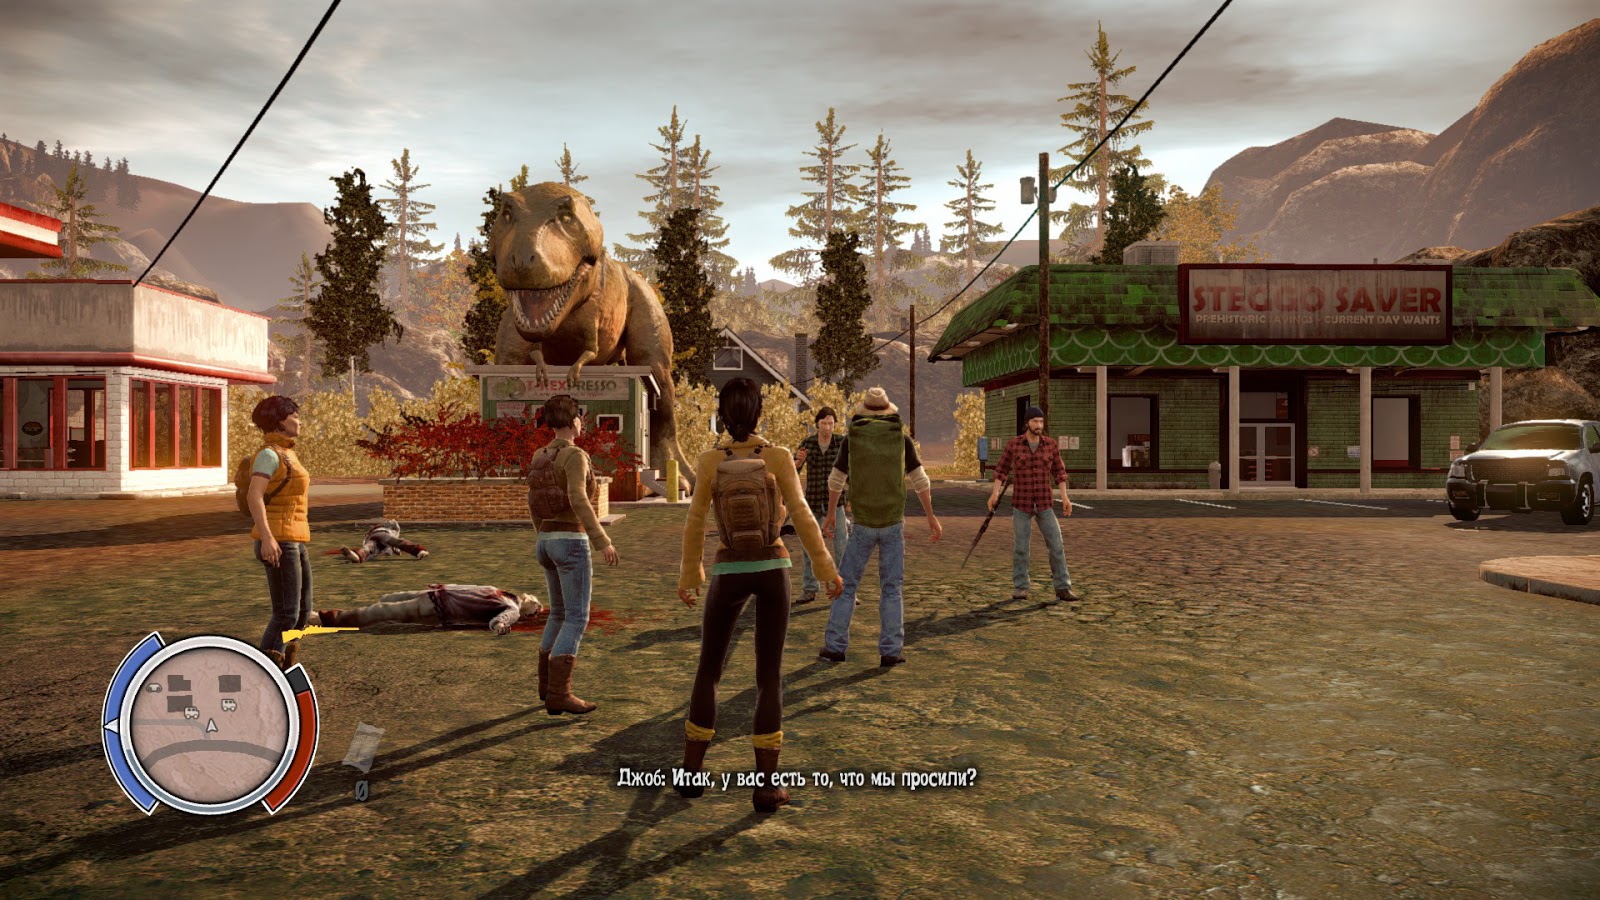 Привет дай игра. State of Decay 1. State of Decay: year one Survival Edition. Стейт оф Дикей 3.